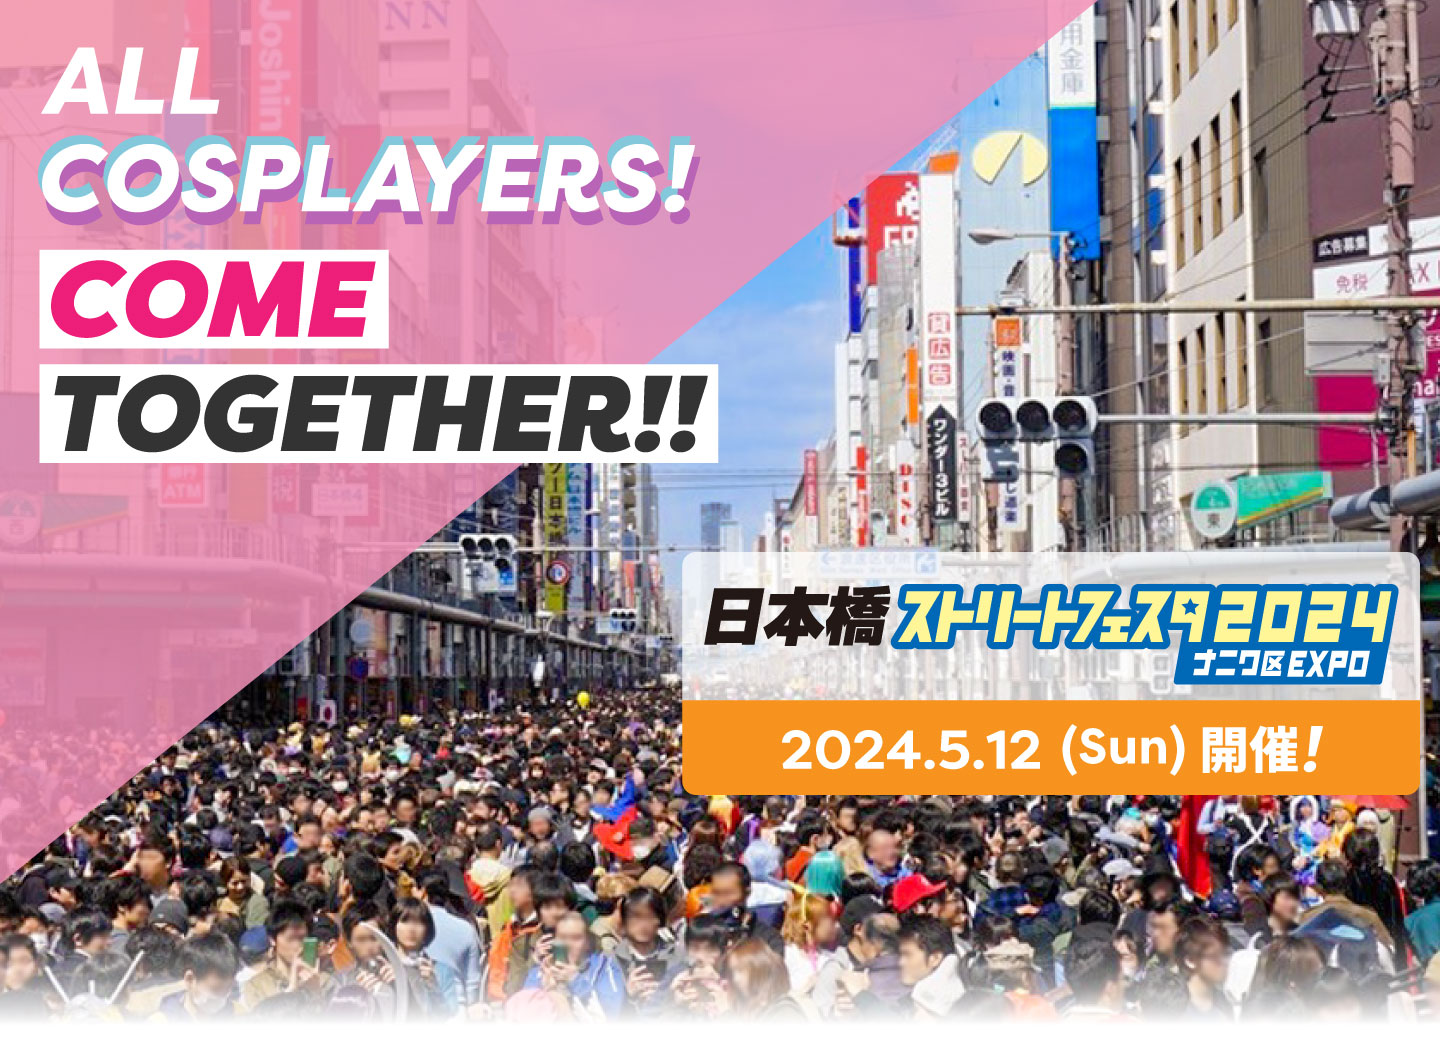 ALL COSPLAYERS! COME TOGETHER!! 日本橋ストリートフェスタ2024.5.12（Sun）開催!!